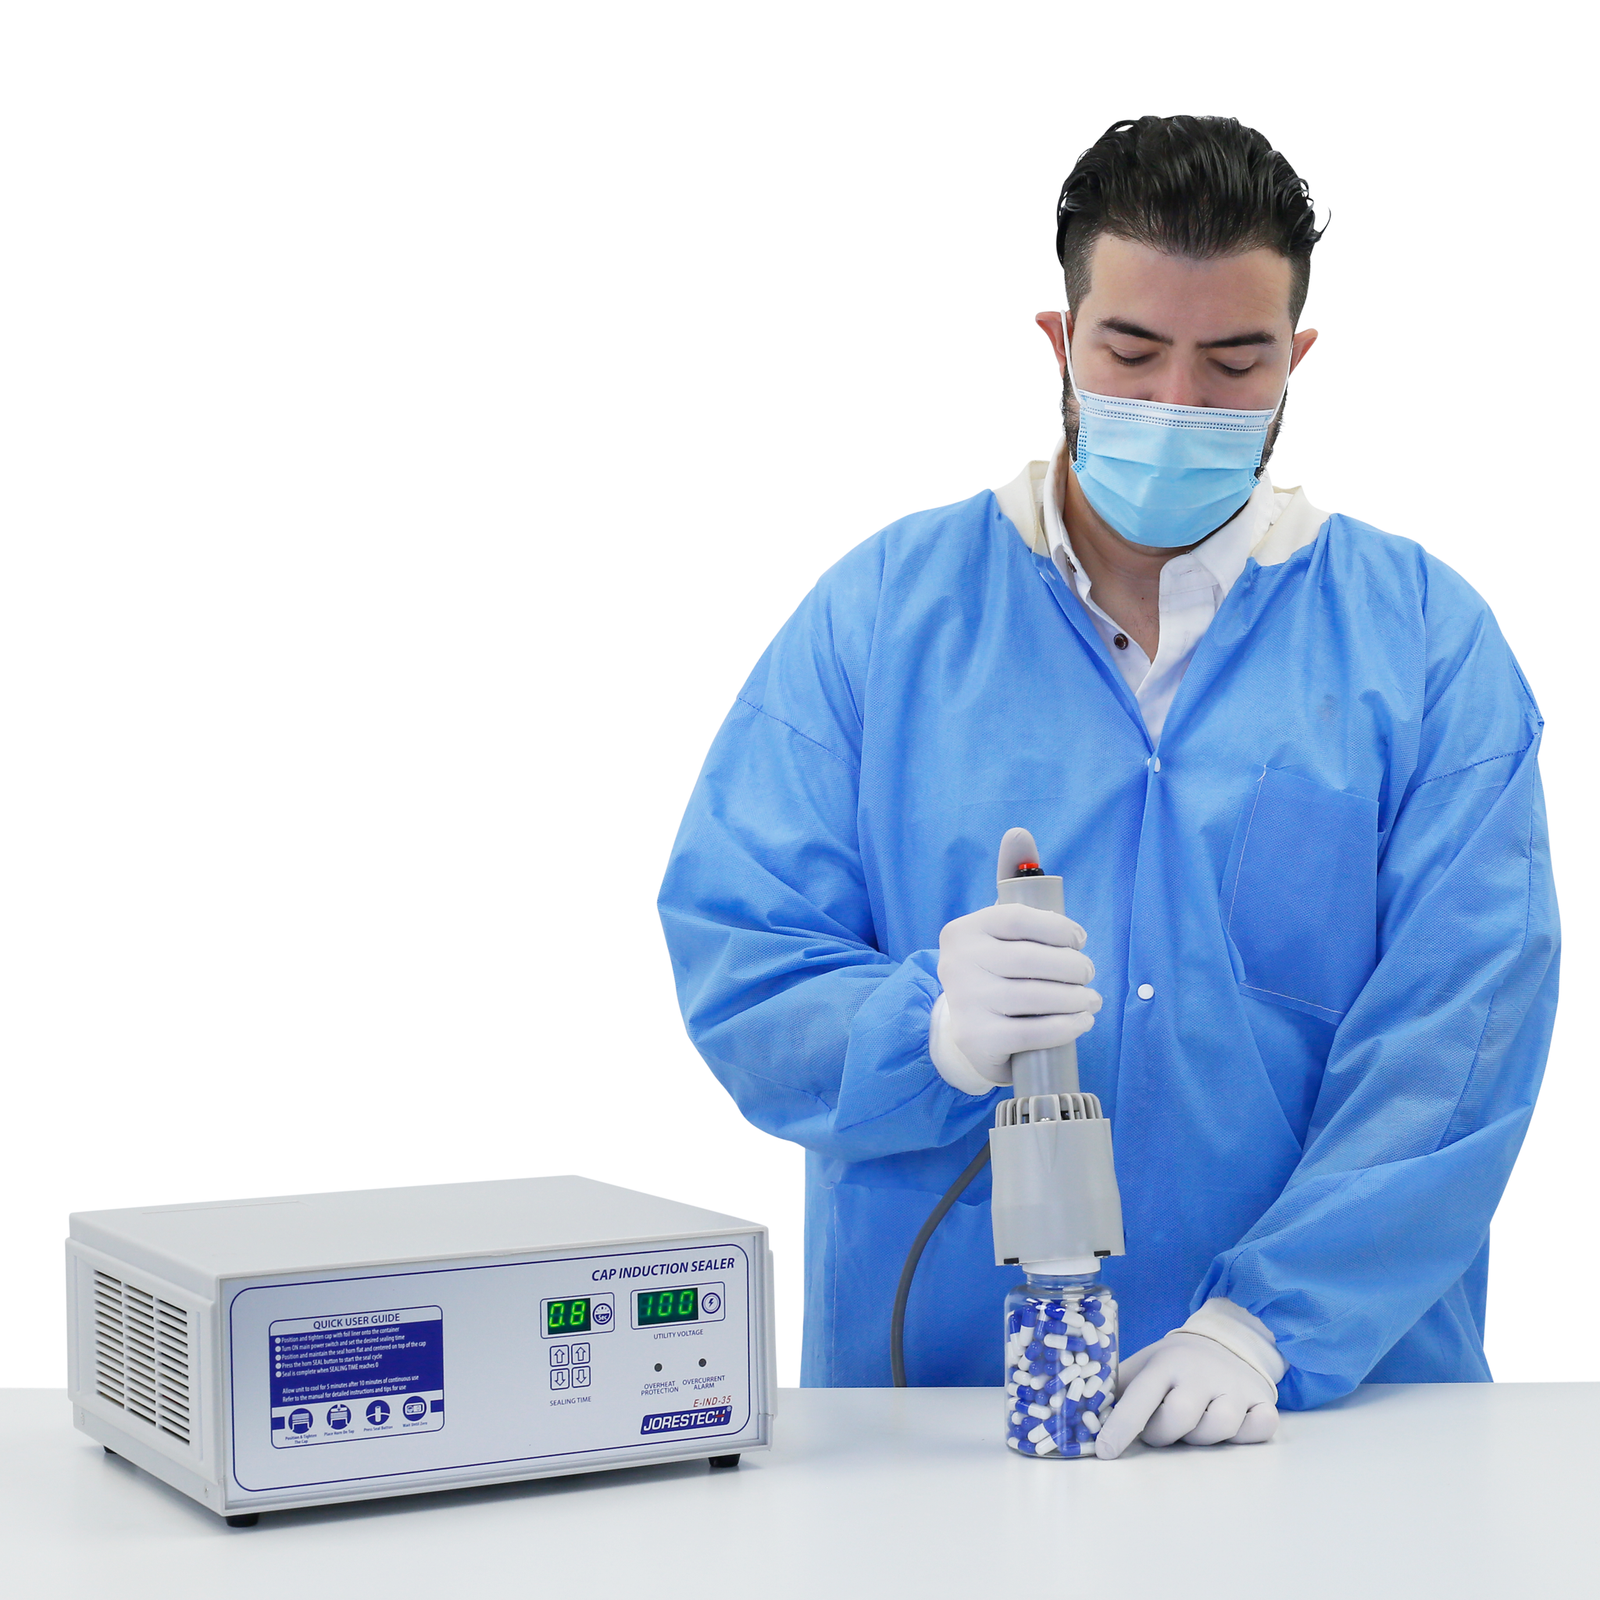 Person in a lab wearing personal protection equipment. He is sealing a bottle filled with pills with induction liners for tamper protection using the Jorestech induction cap sealer